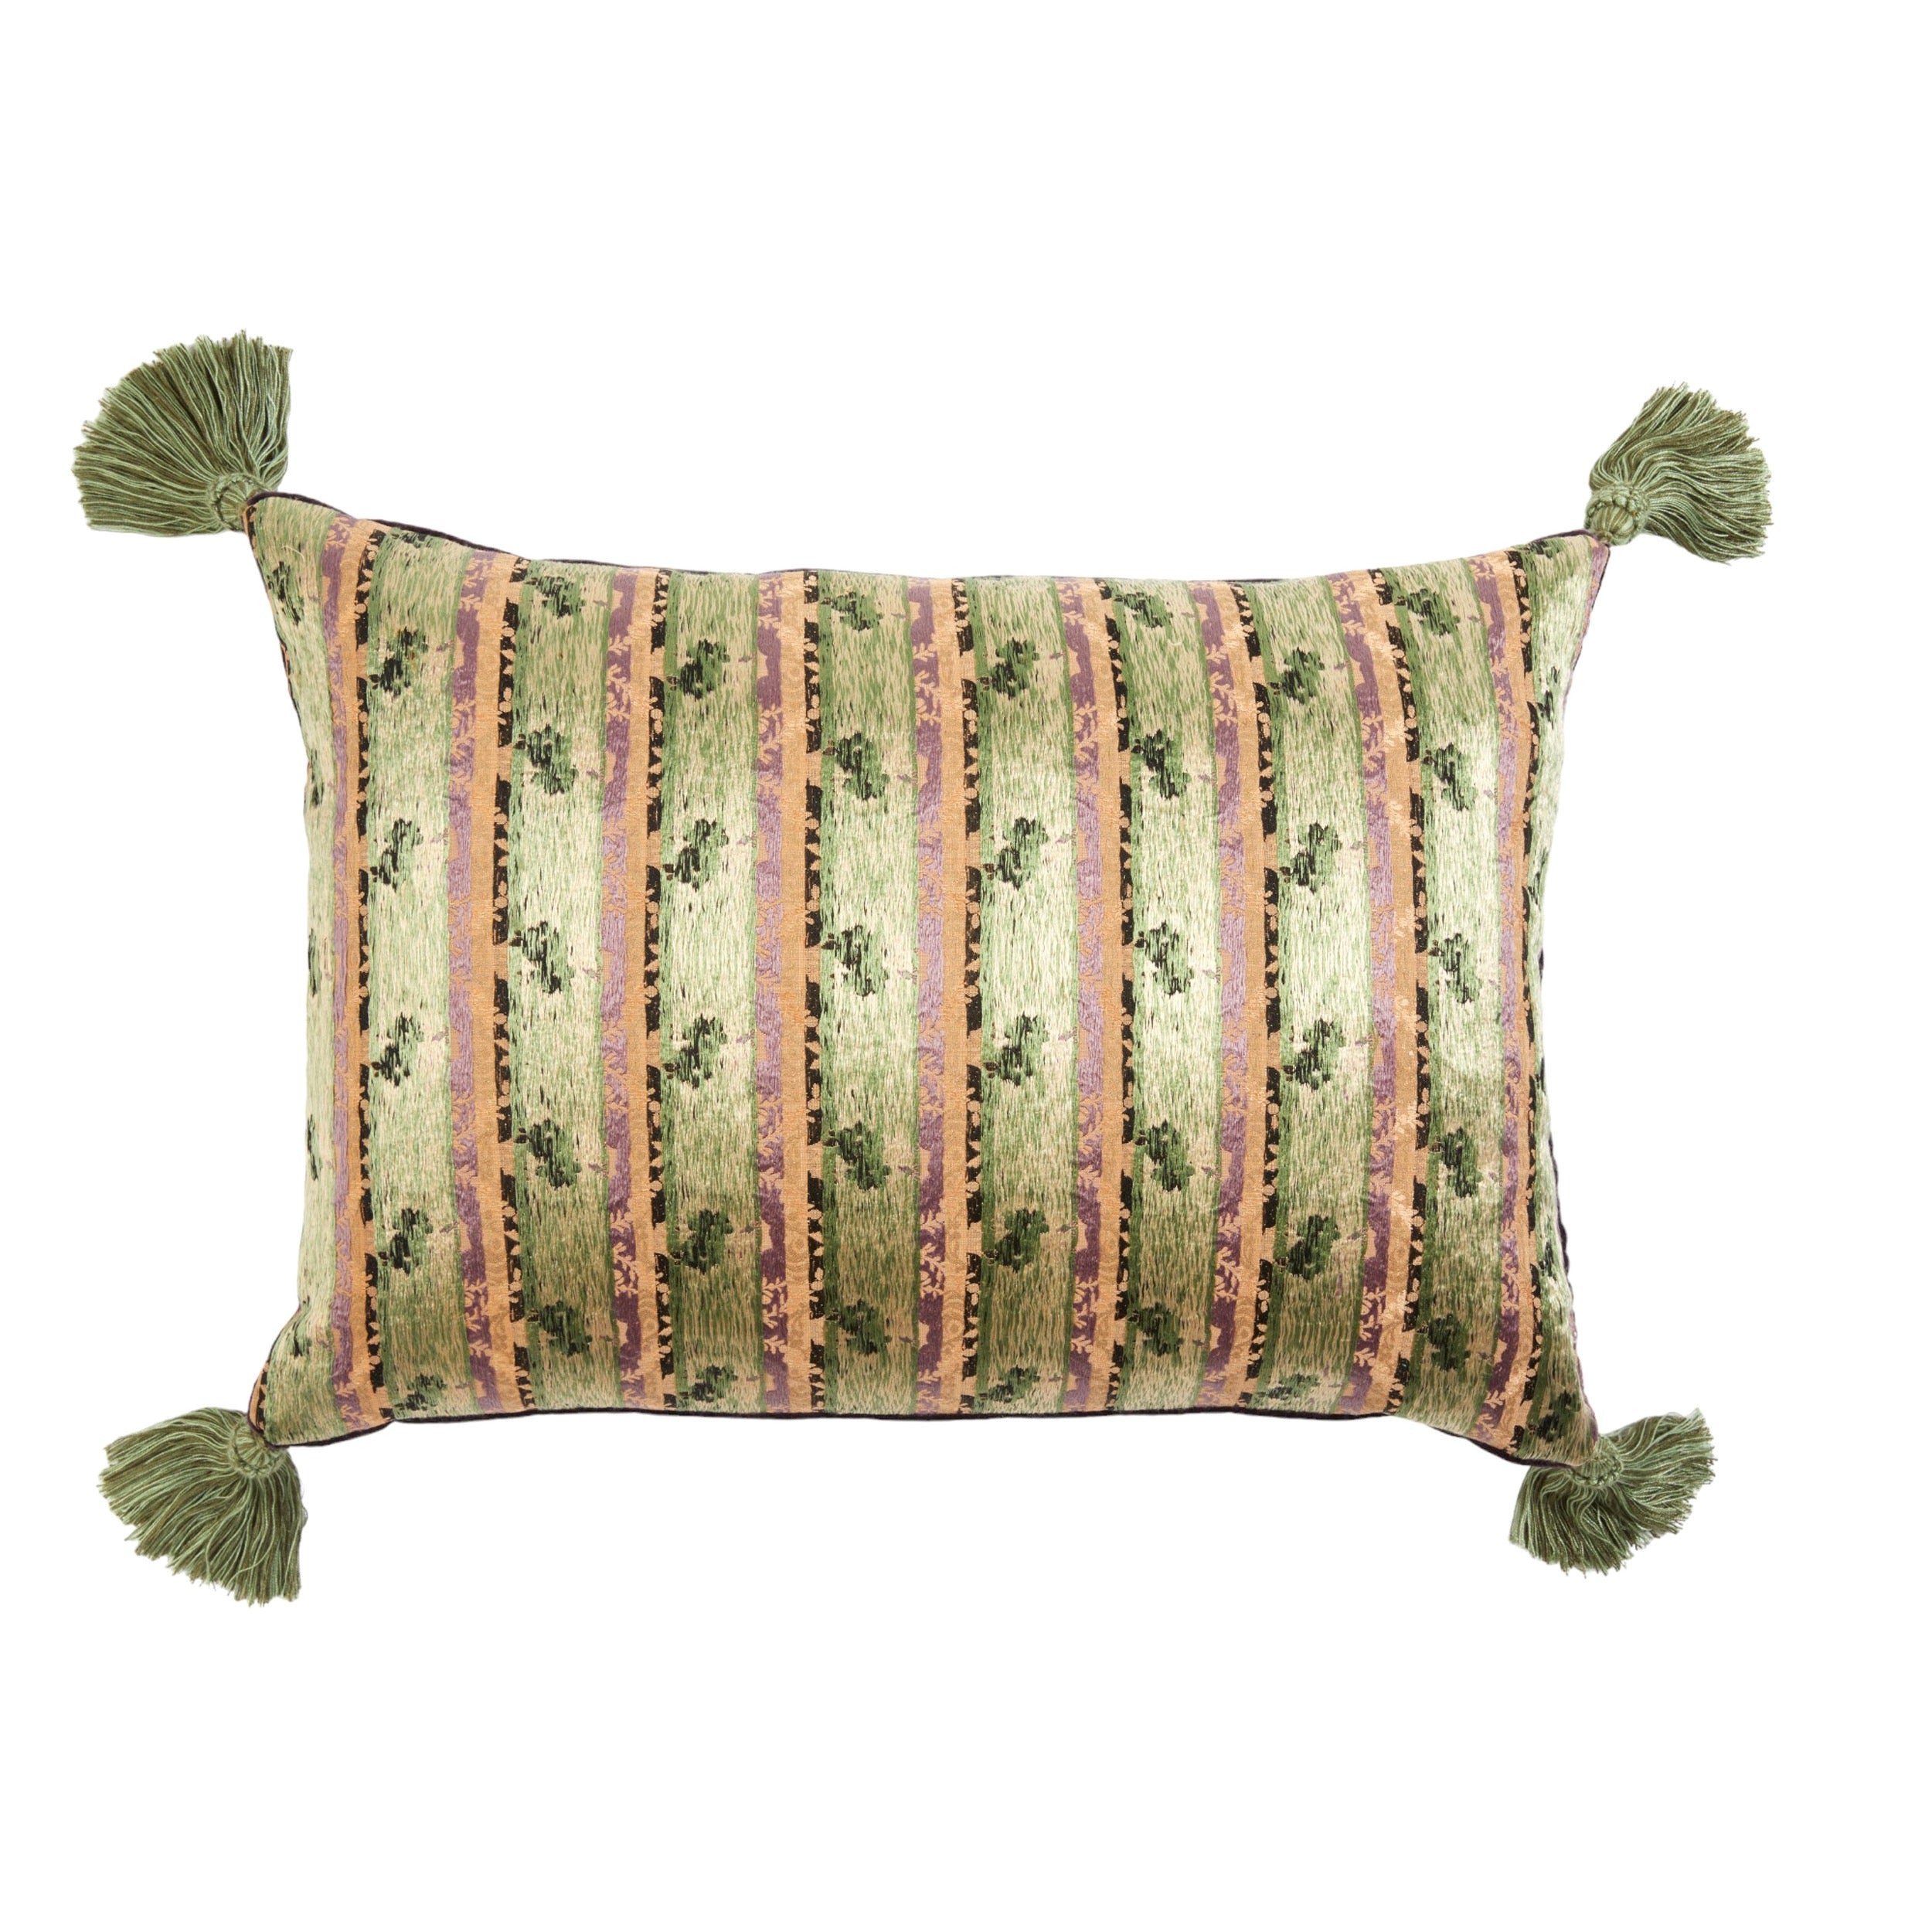 A Pair of Cushions made from a Panel of Silk and Cotton Brocade with Large Italian Silk Tassels